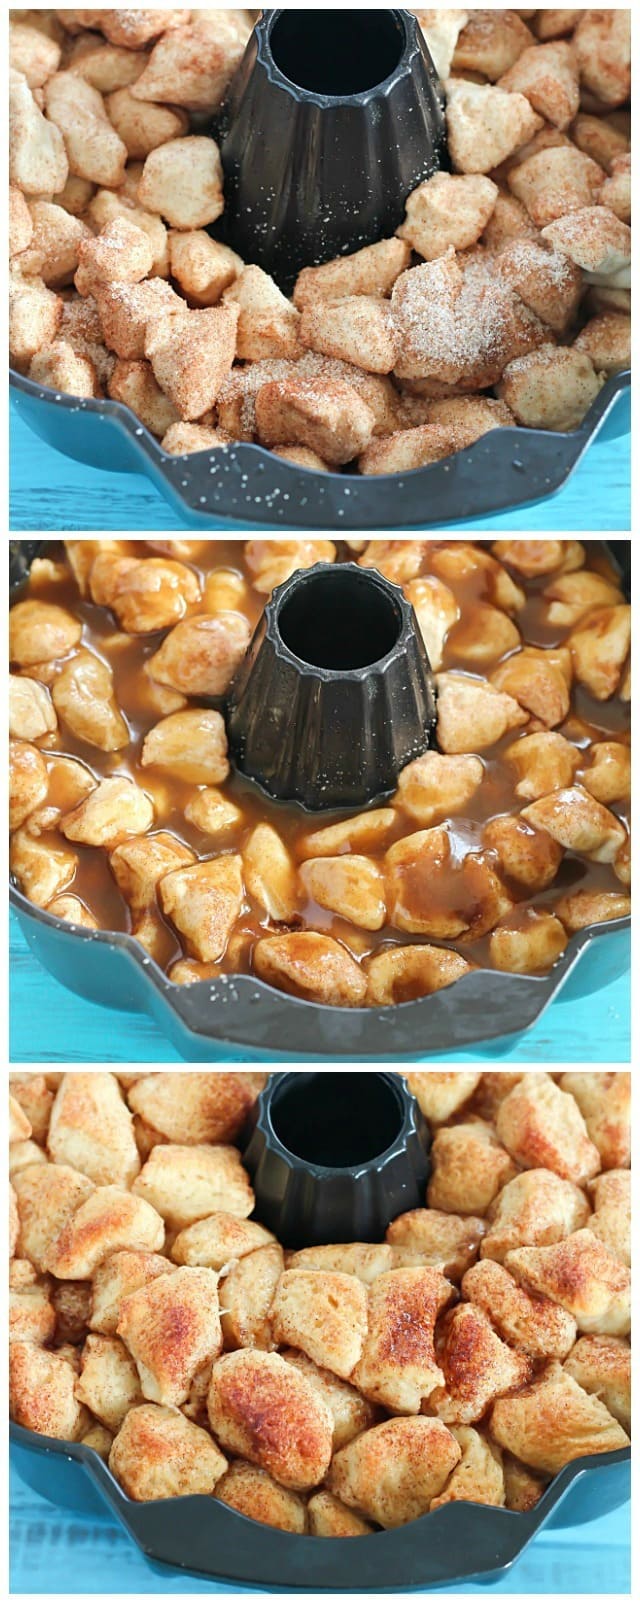 This Caramel Monkey Bread recipe is out of this world delicious! Only 5 simple ingredients to the most delectable, caramel breakfast treat - you NEED to make this!